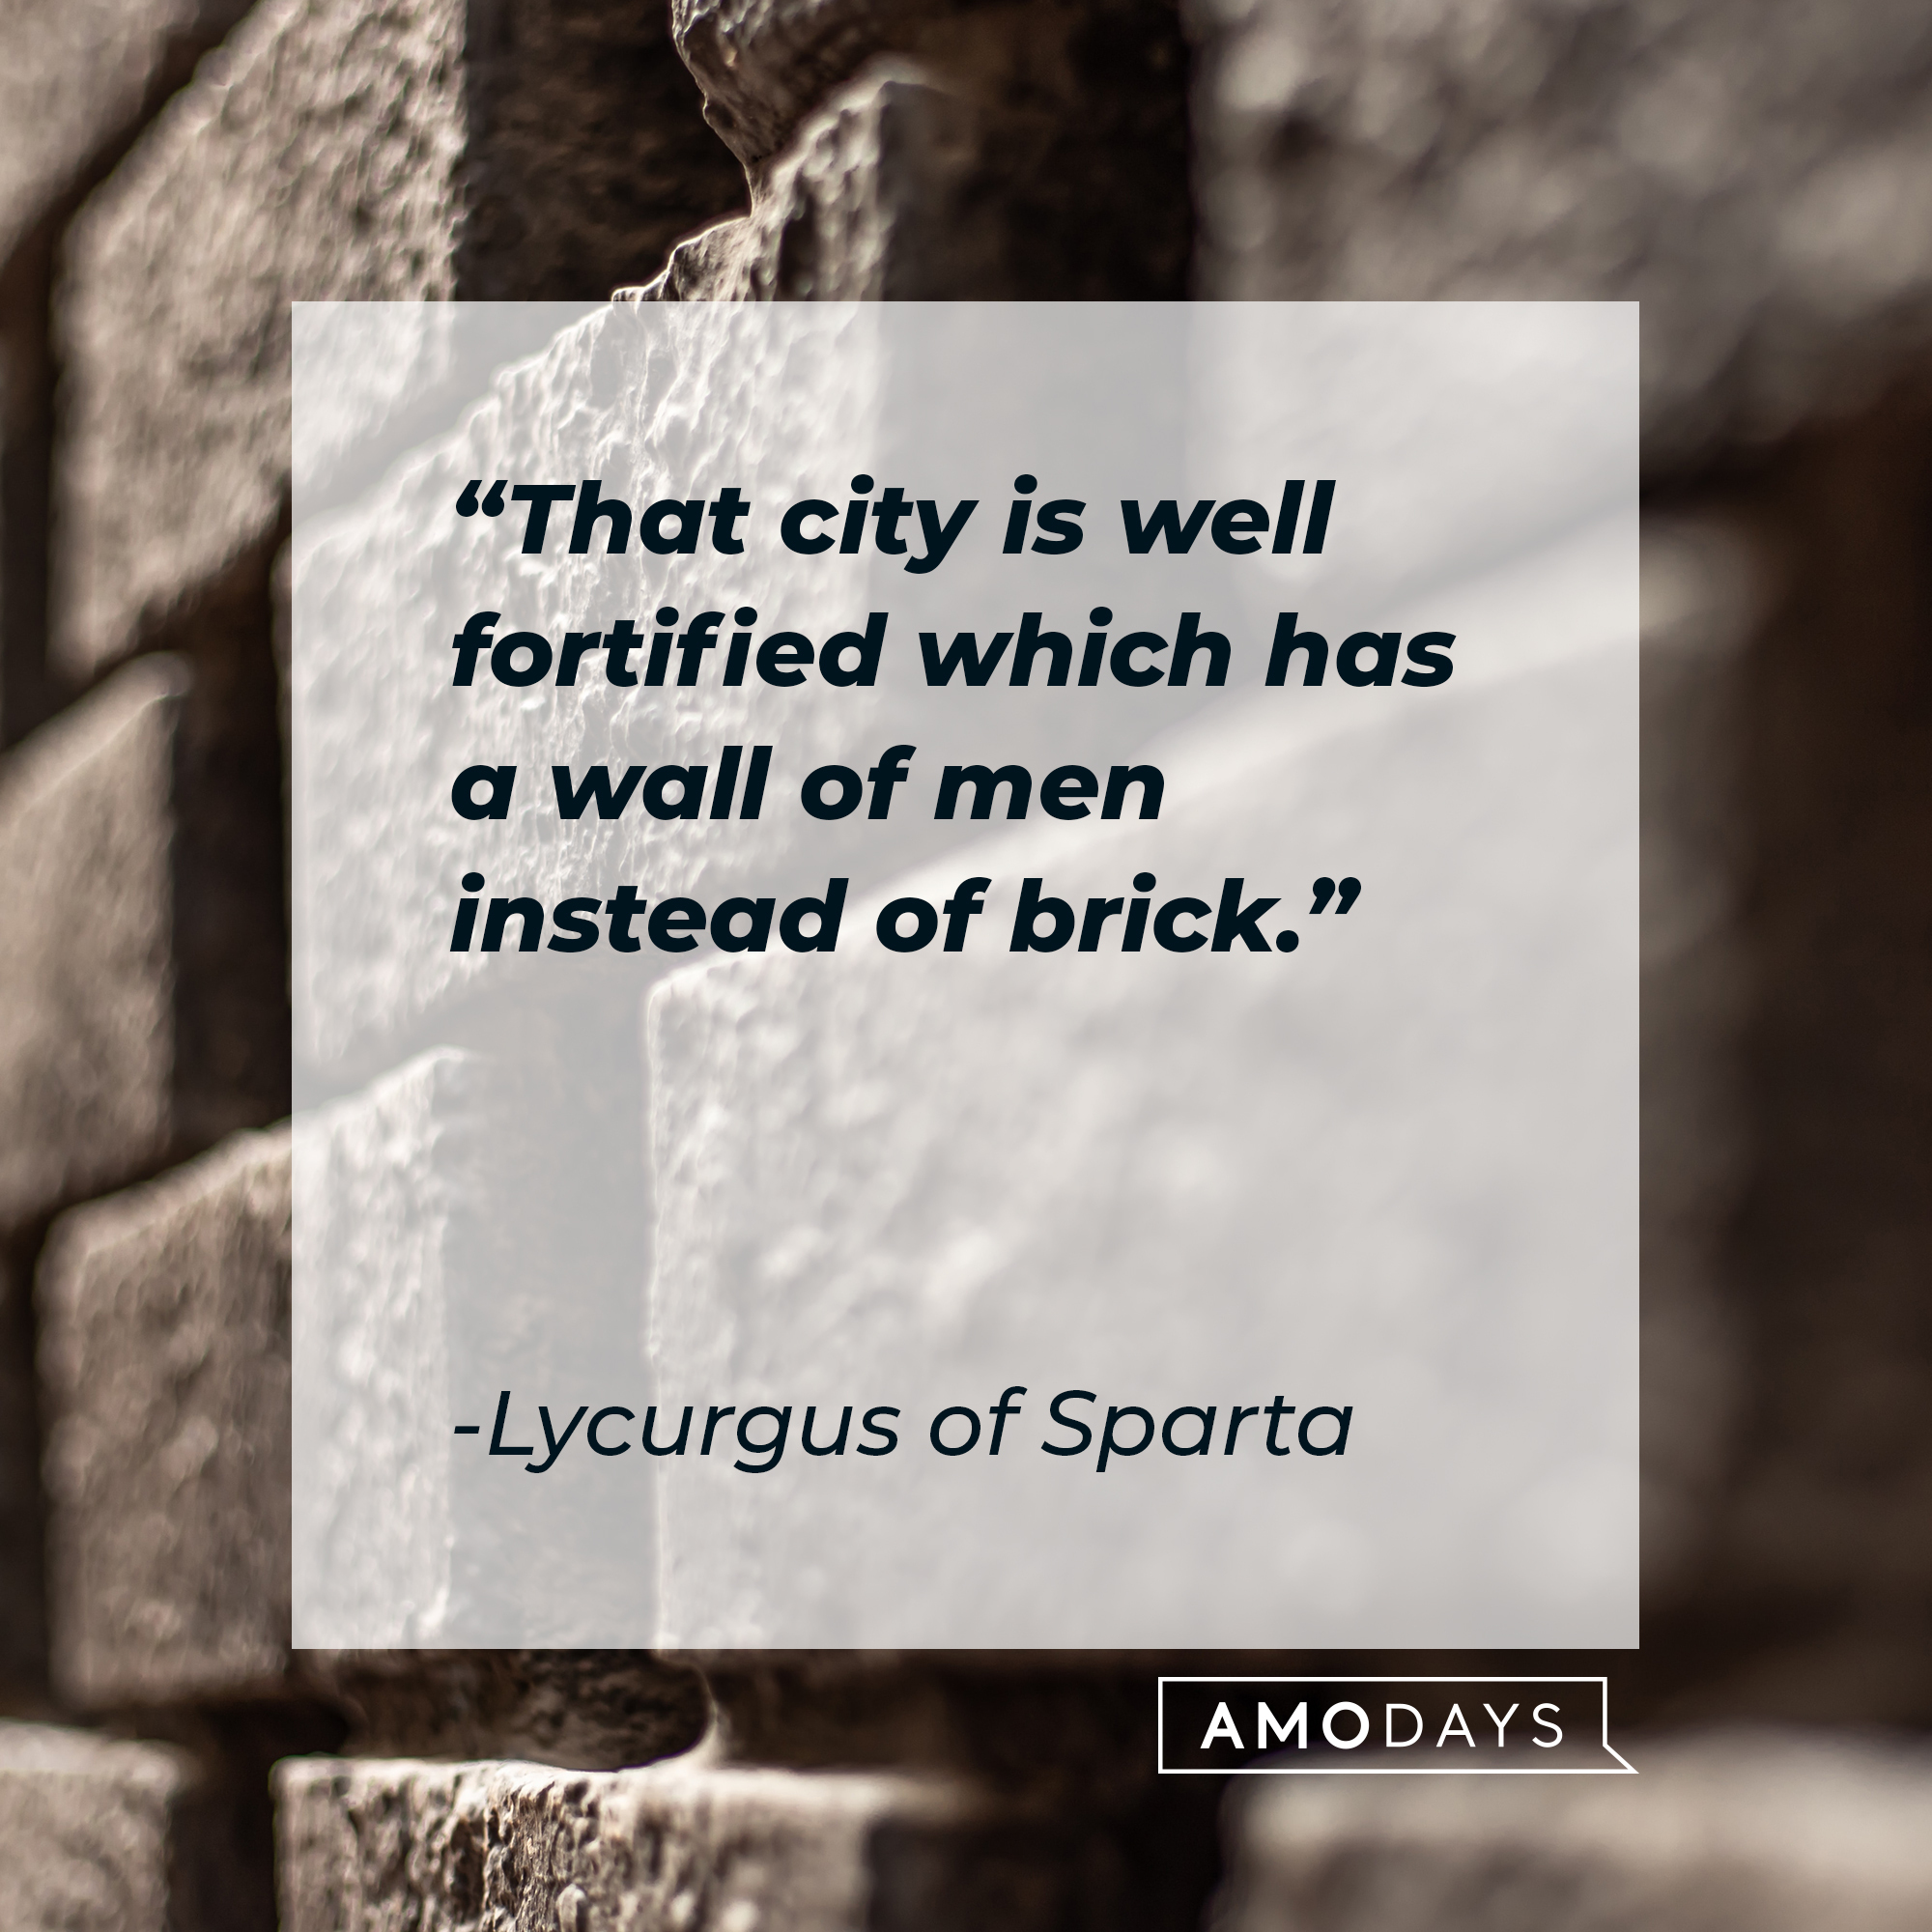 Lycurgus of Sparta's quote: "That city is well fortified which has a wall of men instead of brick." | Source: Unsplash